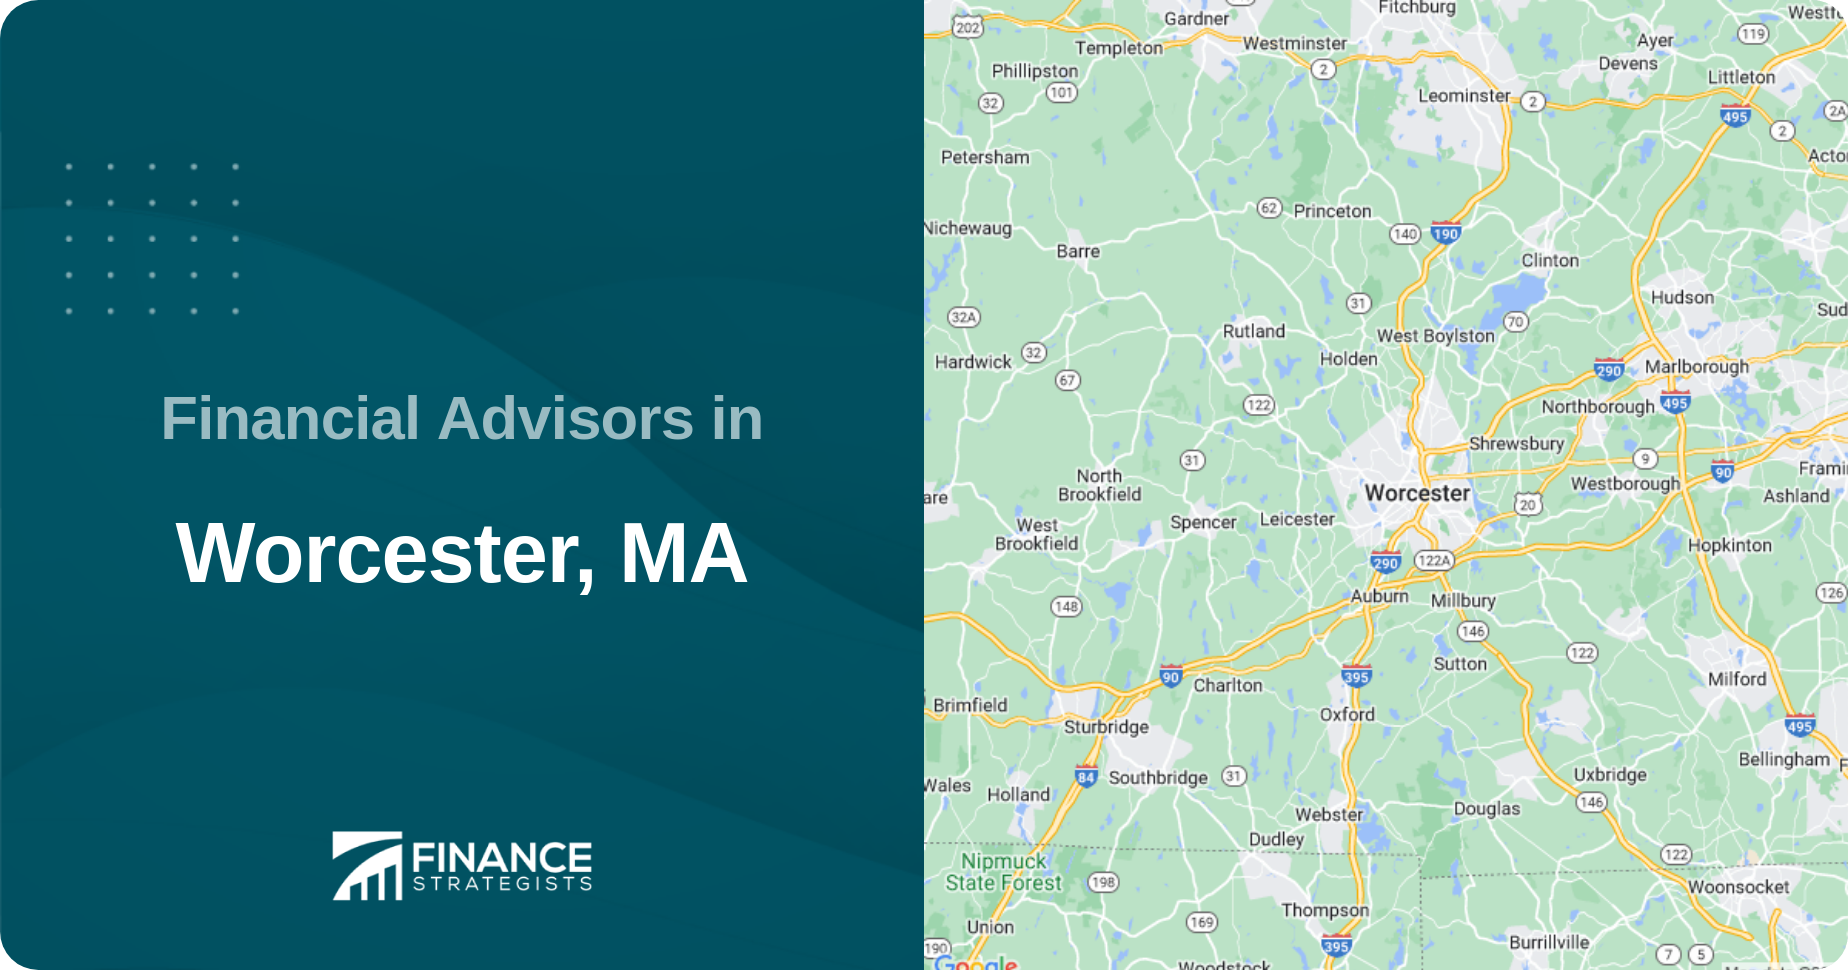 Financial Advisors in Worcester, MA